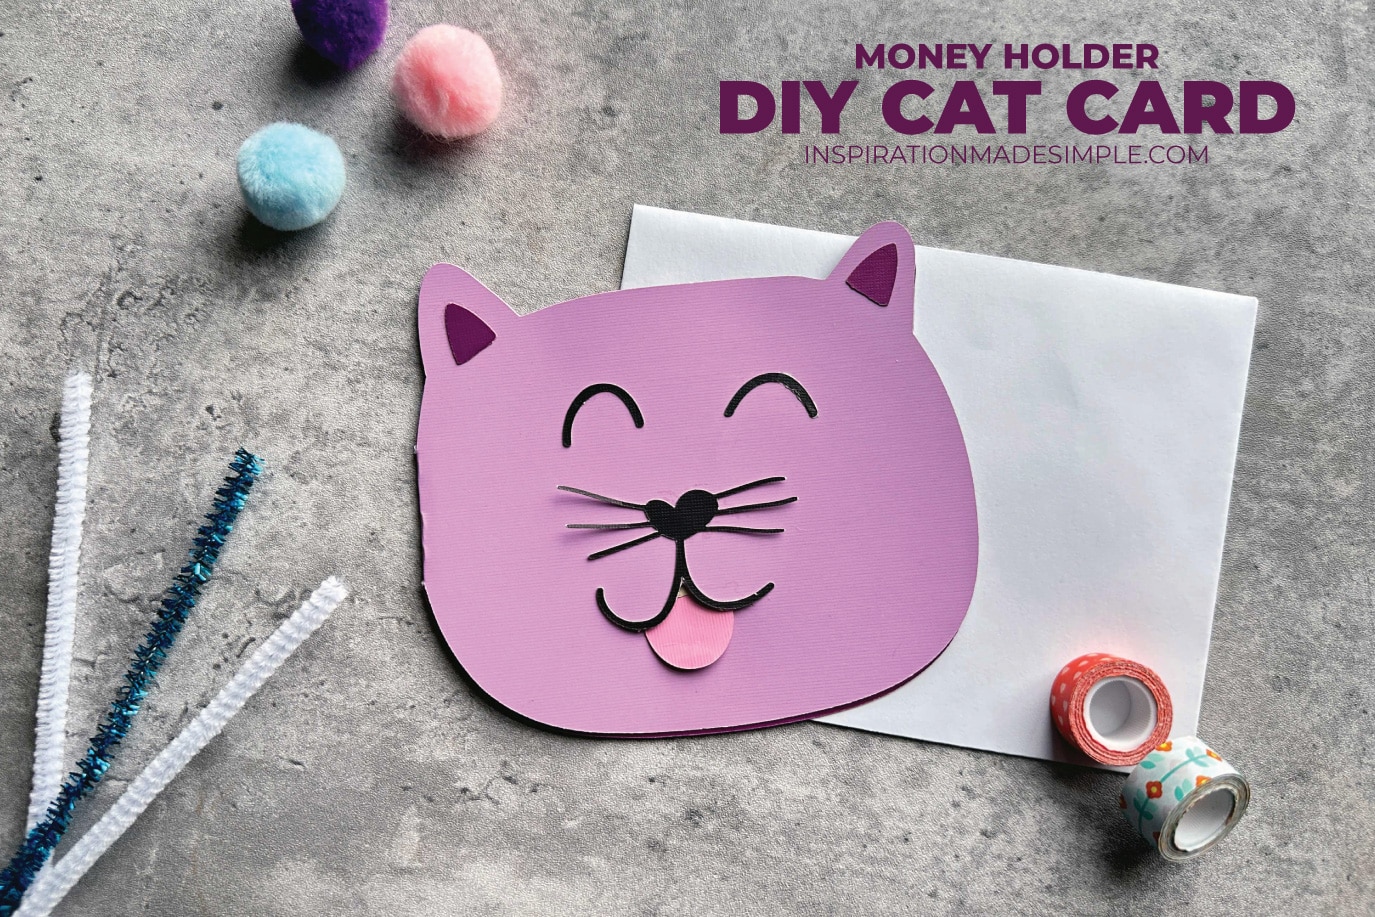 DIY Cat Card with Pull Tongue Money Holder